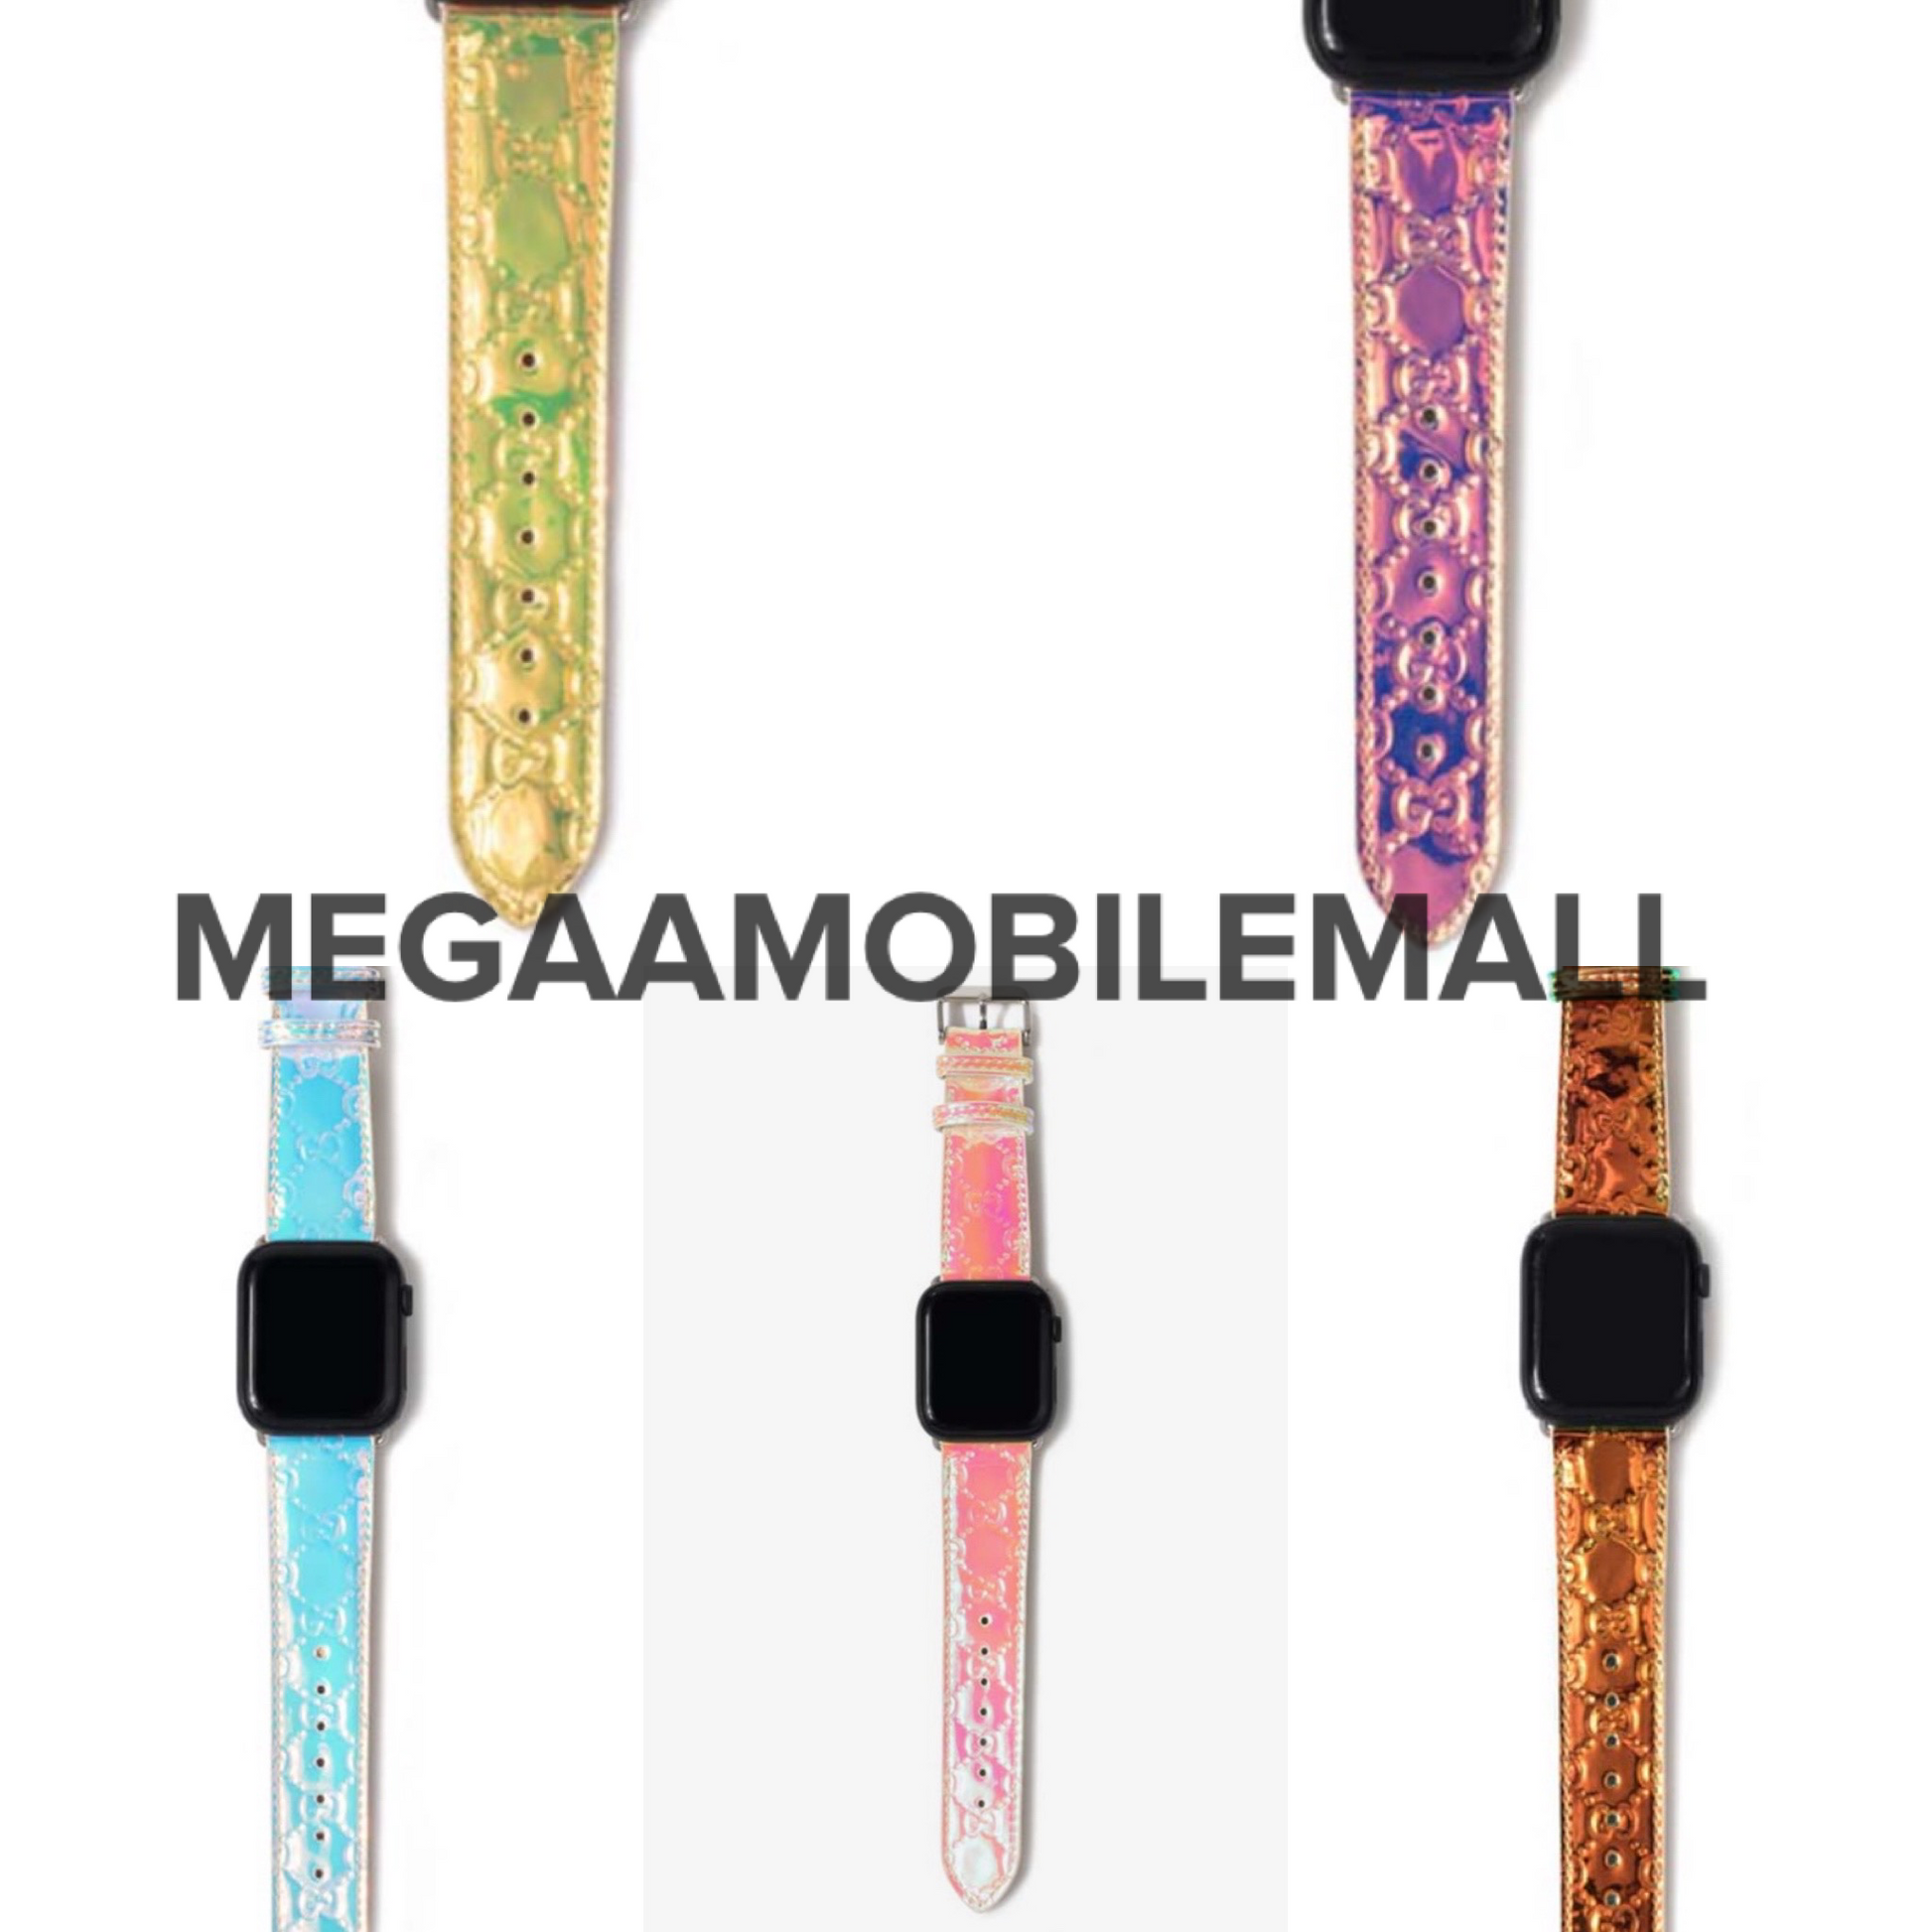 Watch Band GG Prism in 5 colors